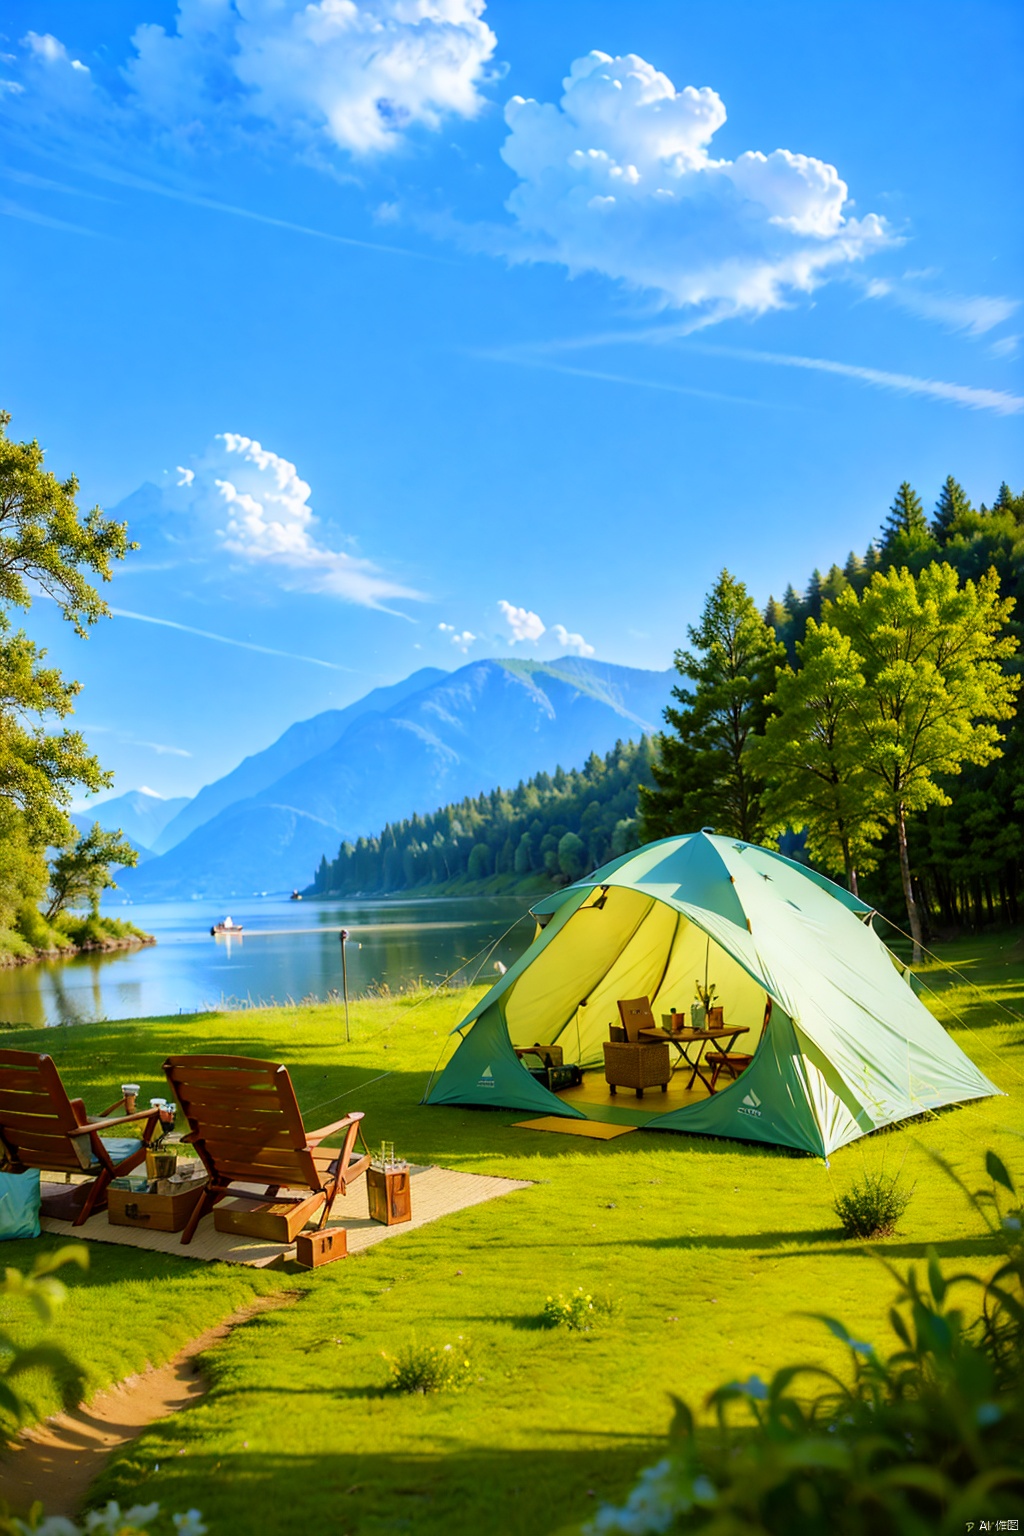  sky, landscape, tree, outdoors, grass, mountains, nature, blurred background, blue sky and white clouds, forest, horizon, lake, tent, RAW photo, high resolution, ultra fine section, high detail RAW color photo, professional photo, masterpiece, best quality, RV, stool, slg, lvshui-green dress